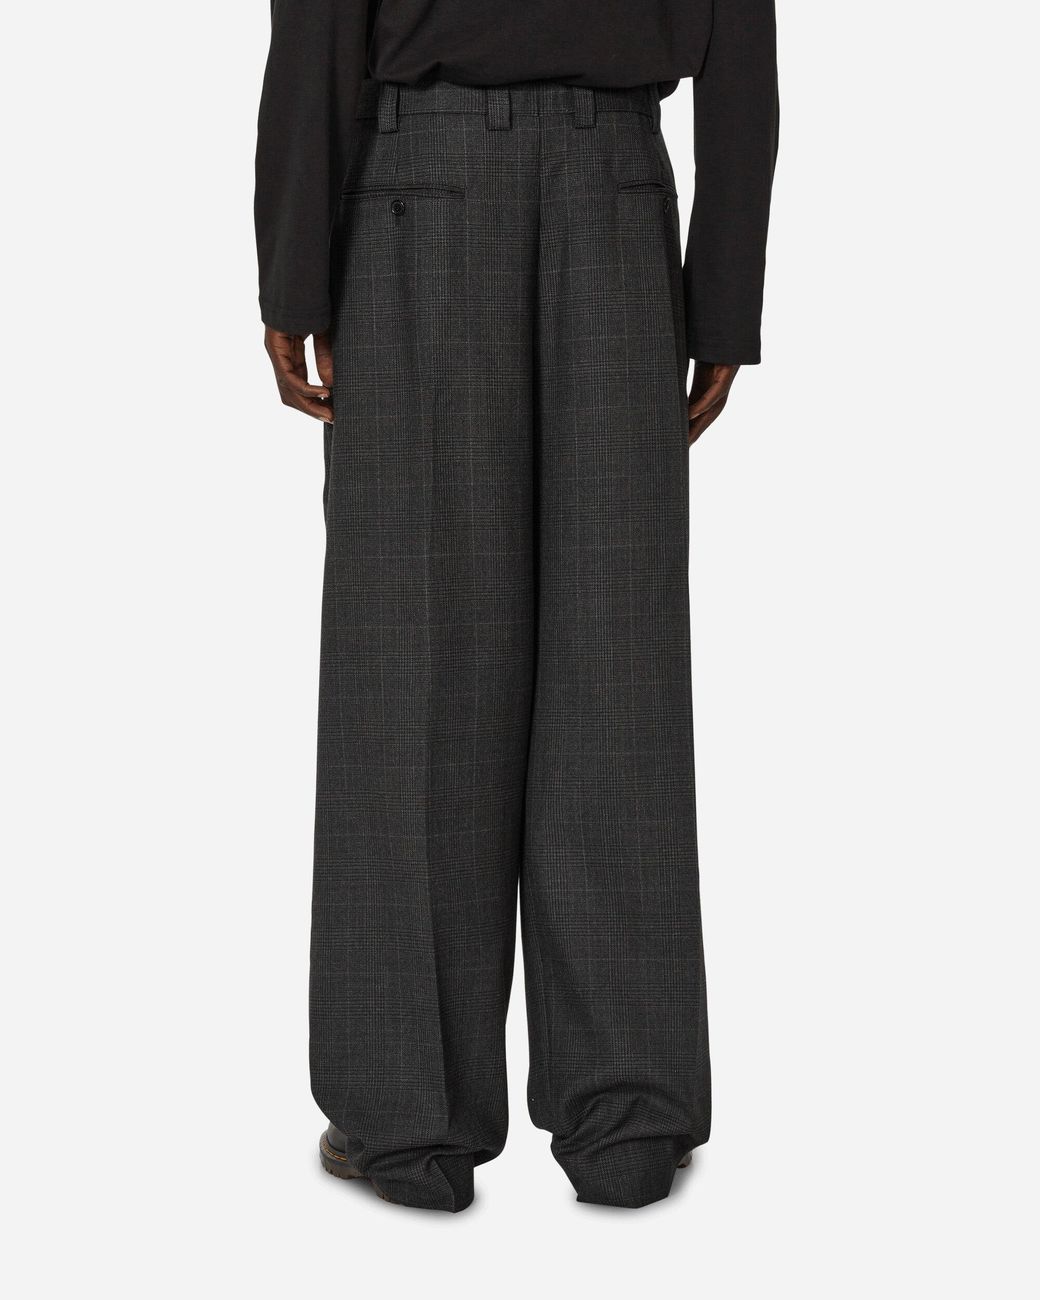 Acne Studios Tailored Wool Blend Wrap Trousers Grey in Black for Men